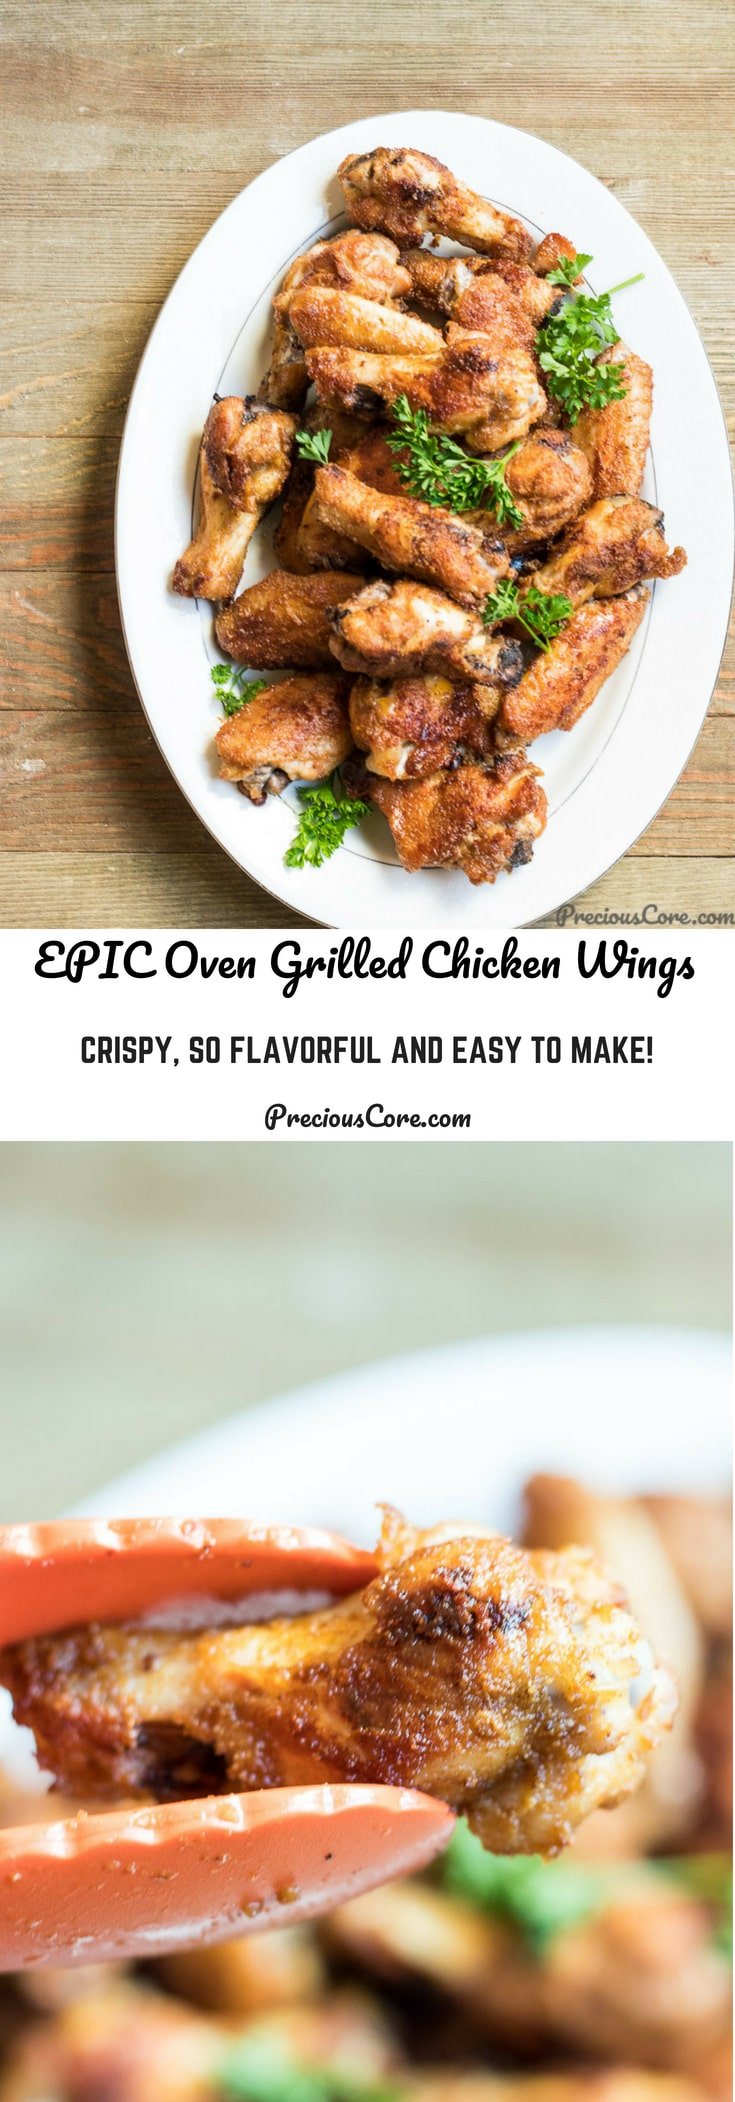 These oven grilled chicken wings are epic in every way. Crispy on the outside, moist on the inside and super tasty with big bold flavors! Get the recipe on @PreciousCore #ChickenWings #OvenGrilledWings #Grilling